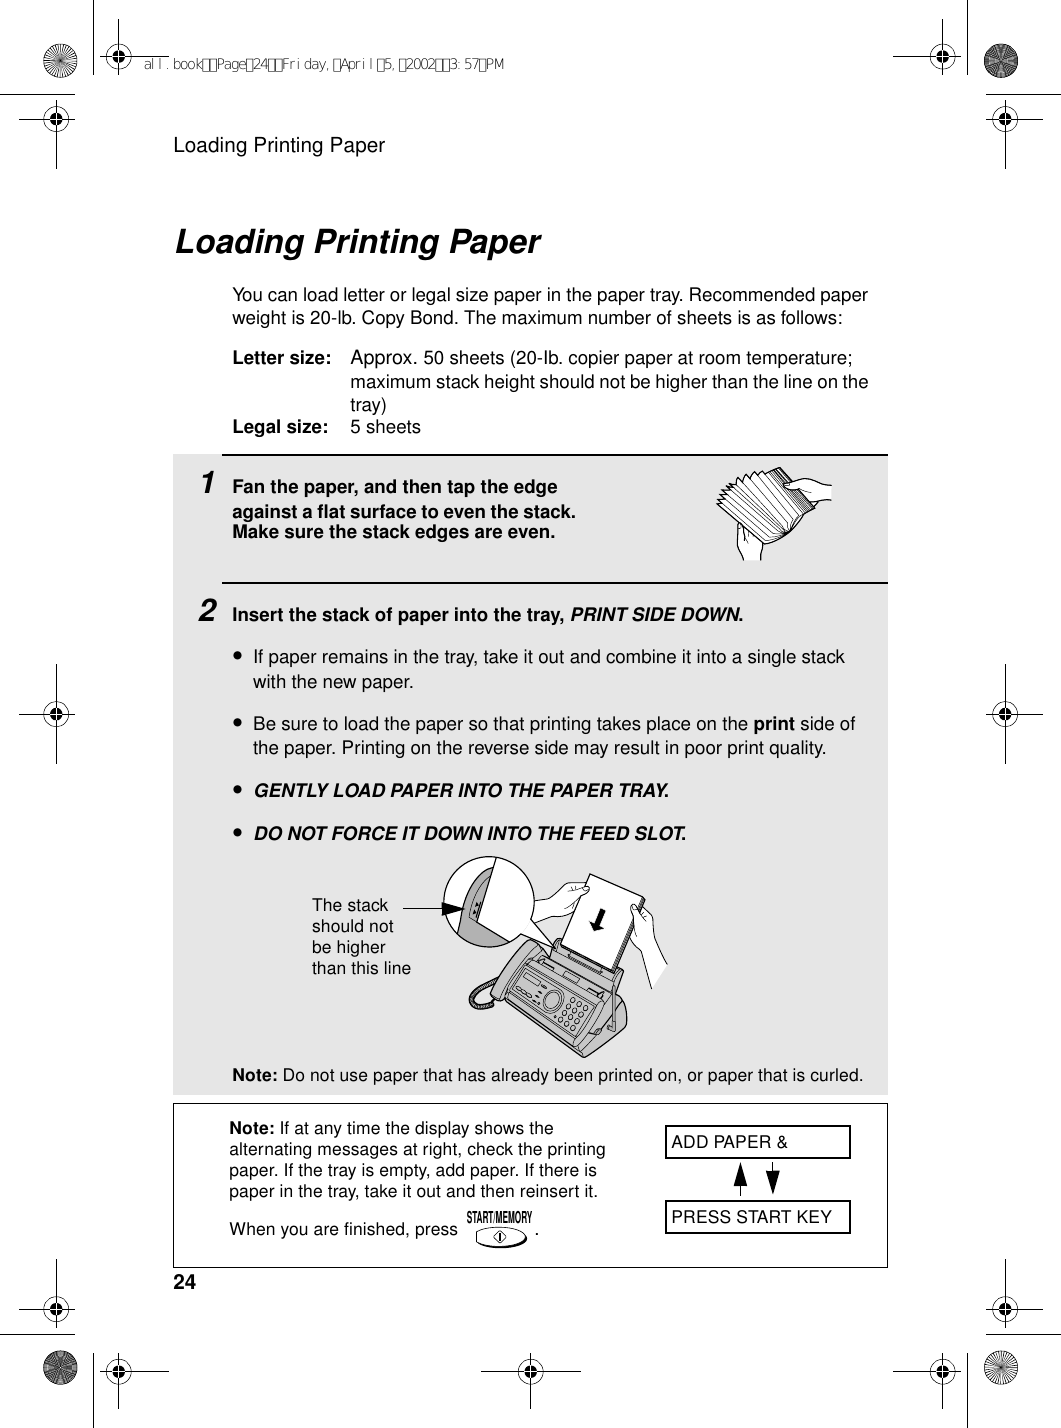 Loading Printing Paper241Fan the paper, and then tap the edge against a flat surface to even the stack. Make sure the stack edges are even.2Insert the stack of paper into the tray, PRINT SIDE DOWN.•If paper remains in the tray, take it out and combine it into a single stack with the new paper.•Be sure to load the paper so that printing takes place on the print side of the paper. Printing on the reverse side may result in poor print quality.•GENTLY LOAD PAPER INTO THE PAPER TRAY.•DO NOT FORCE IT DOWN INTO THE FEED SLOT.Note: Do not use paper that has already been printed on, or paper that is curled. Loading Printing PaperYou can load letter or legal size paper in the paper tray. Recommended paper weight is 20-lb. Copy Bond. The maximum number of sheets is as follows:Letter size: Approx. 50 sheets (20-Ib. copier paper at room temperature; maximum stack height should not be higher than the line on the tray)Legal size: 5 sheetsNote: If at any time the display shows the alternating messages at right, check the printing paper. If the tray is empty, add paper. If there is paper in the tray, take it out and then reinsert it. When you are finished, press .START/MEMORYADD PAPER &amp;PRESS START KEYThe stack should not be higher than this lineall.bookPage24Friday,April5,20023:57PM